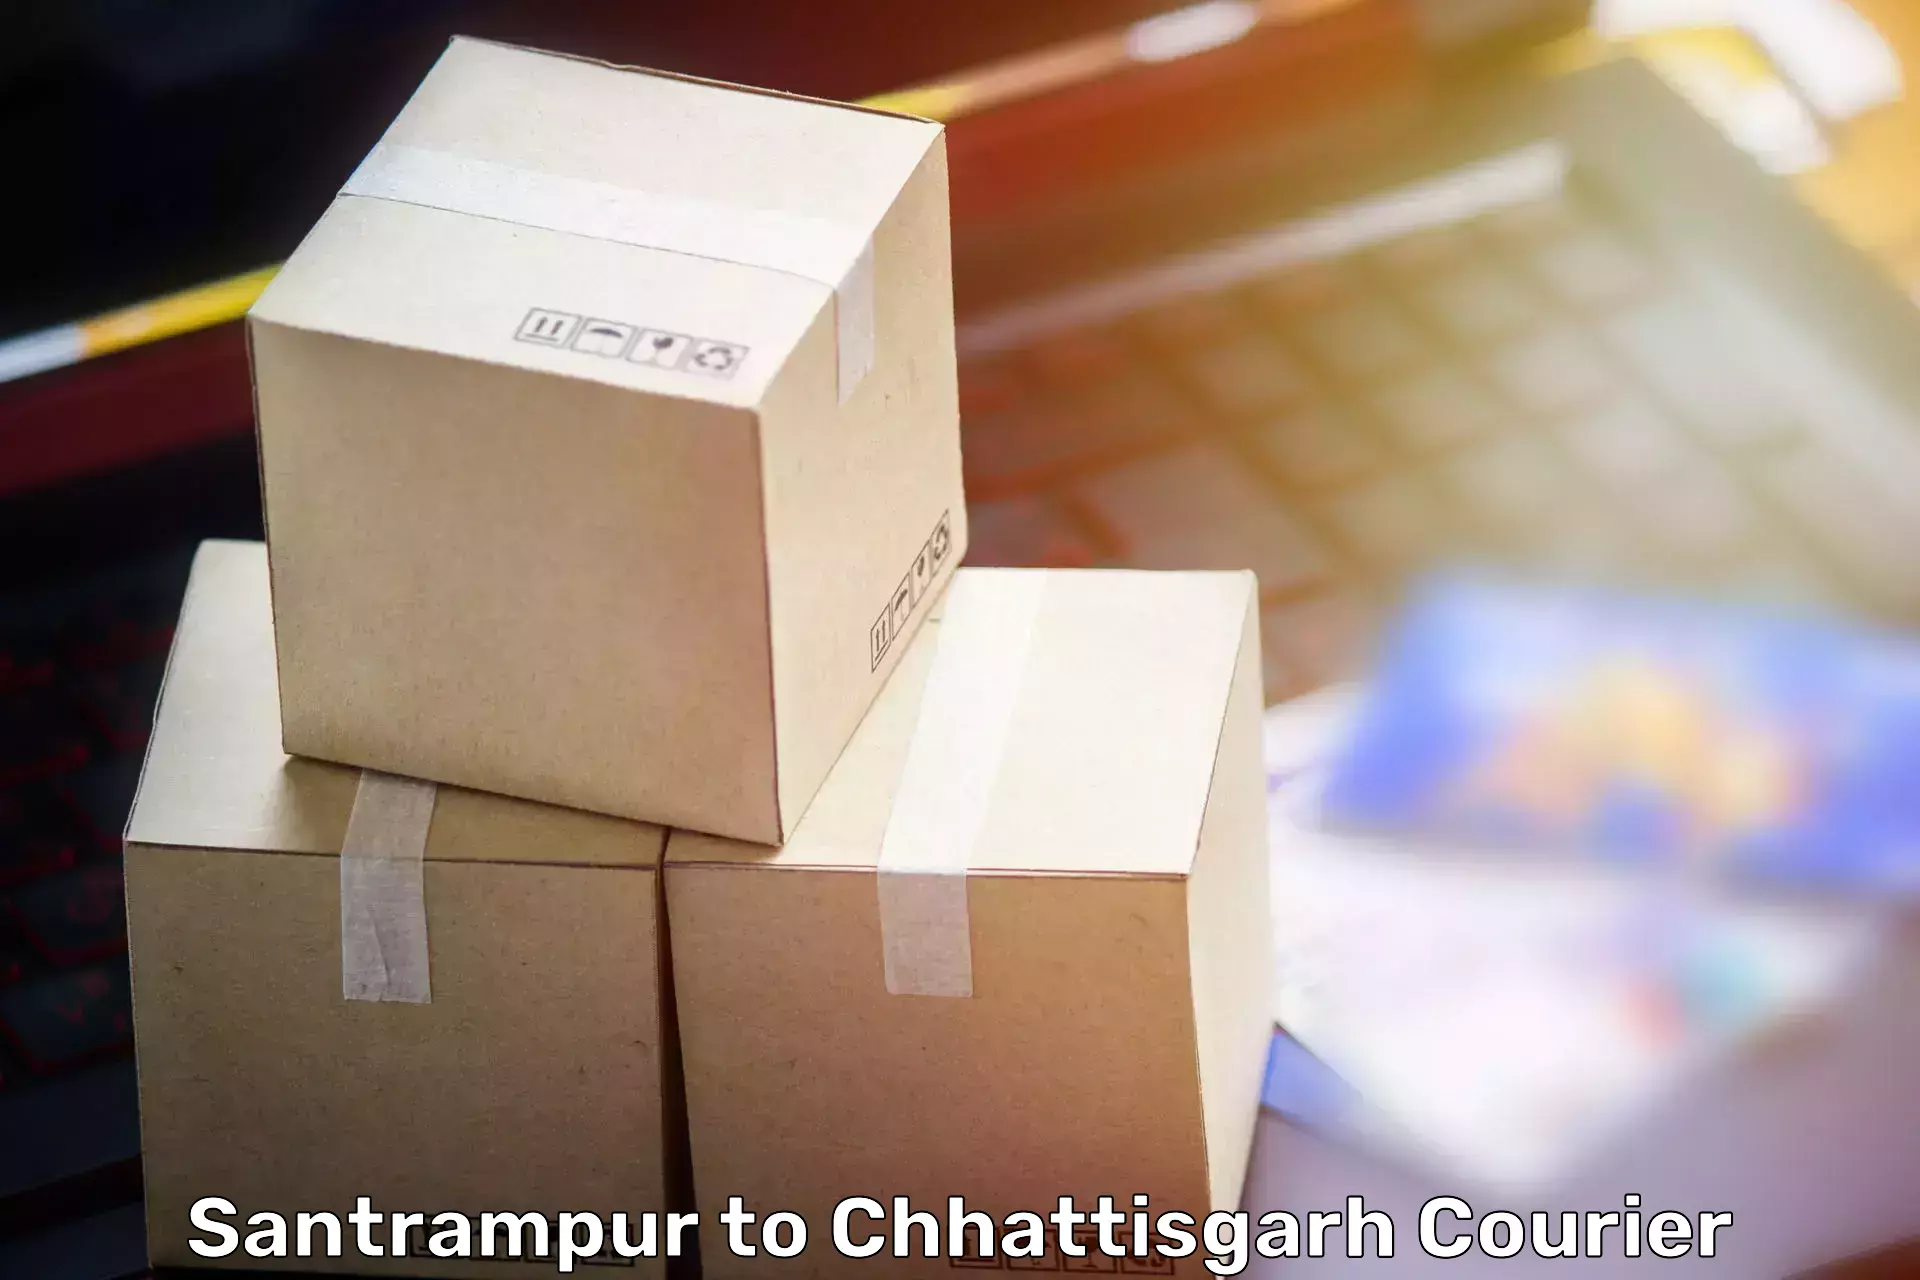 Furniture moving experts Santrampur to Raigarh